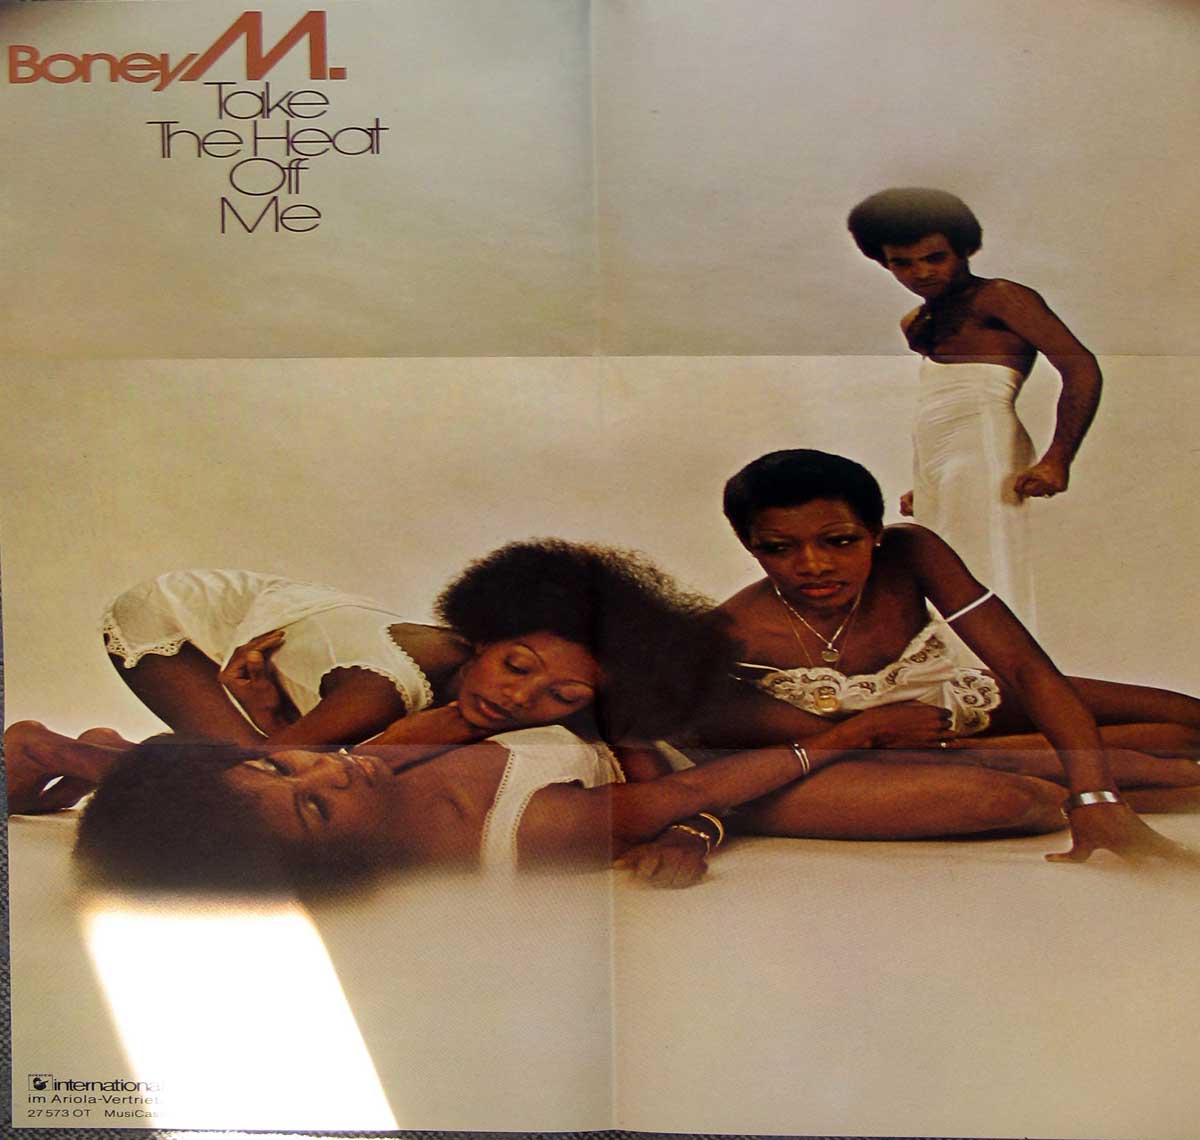  Poster  of Boney M on "Take The Heat Off Me"  